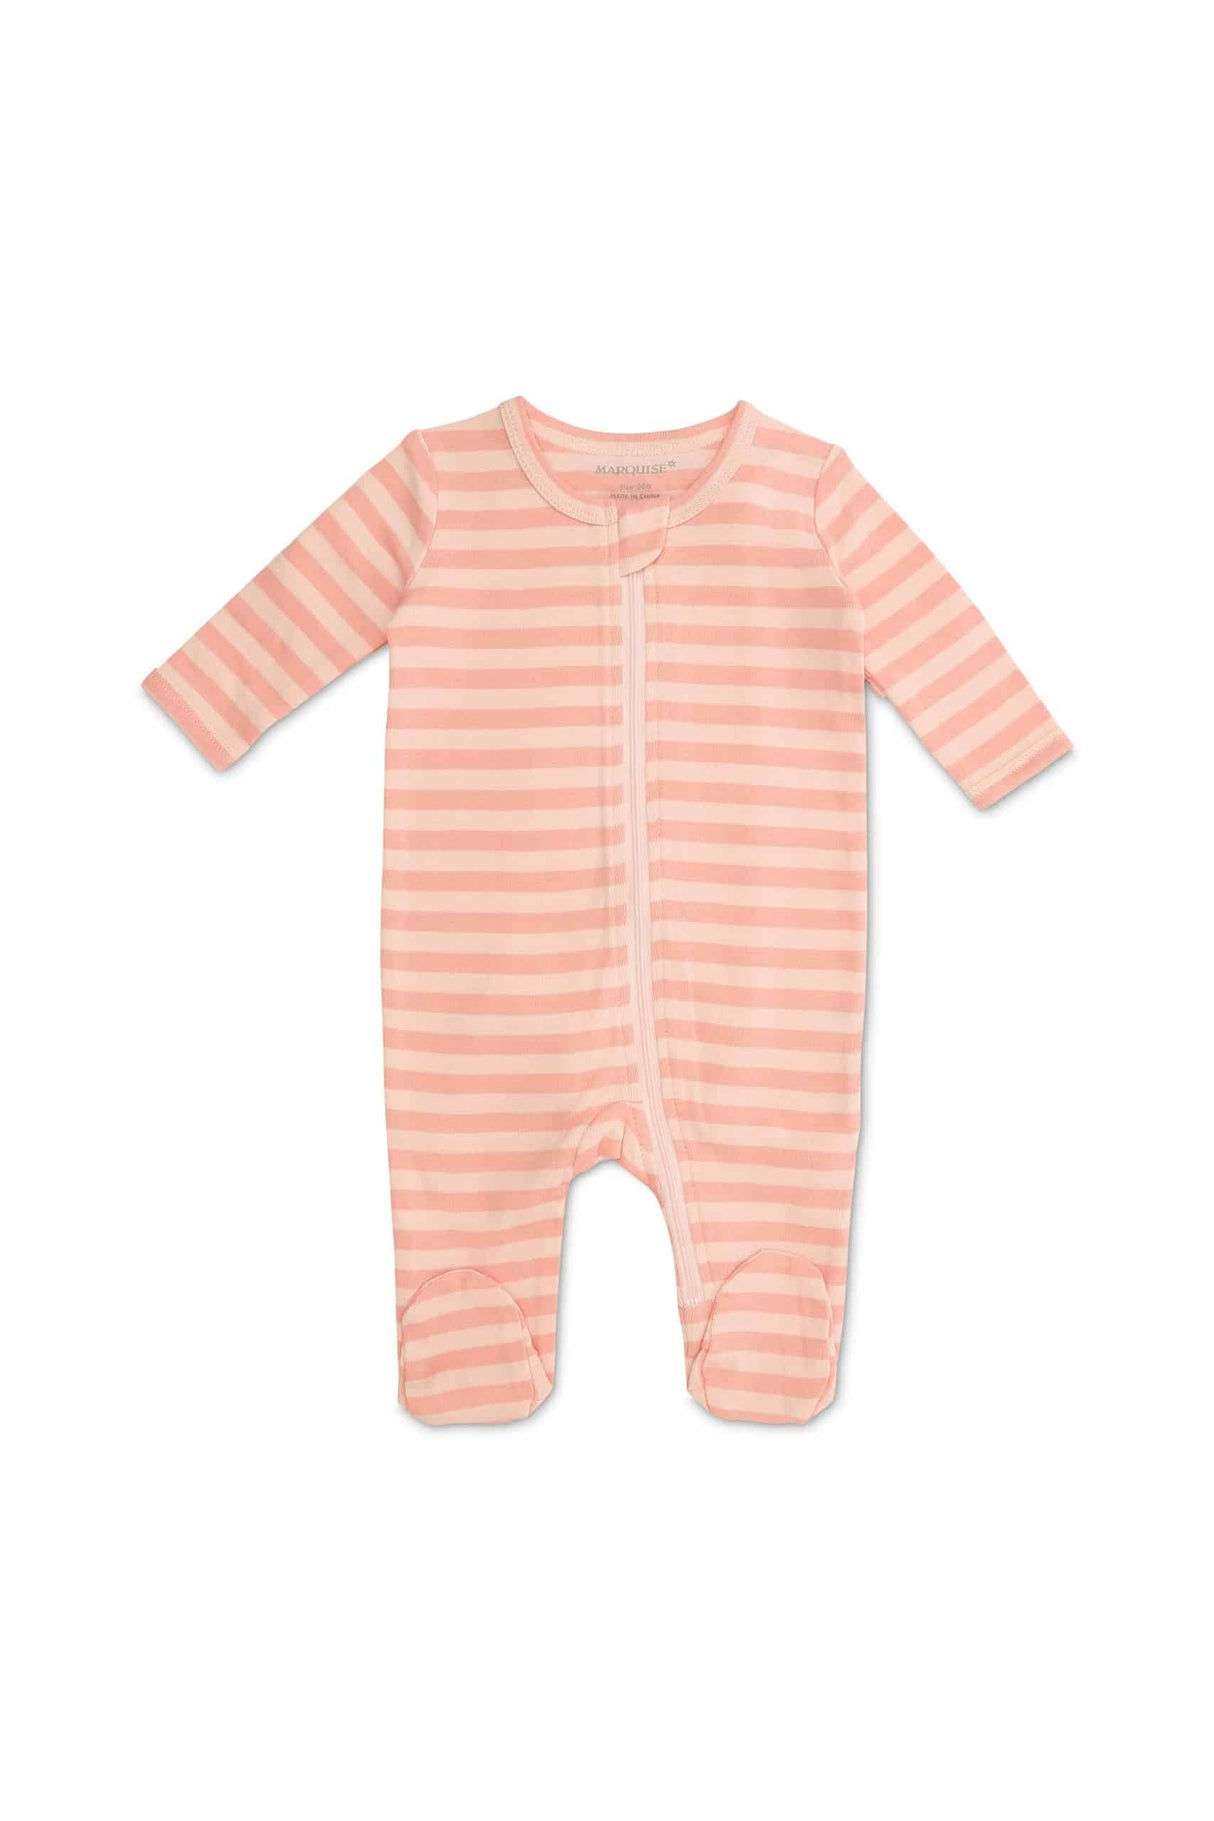 Pineapple and Pink Stripe Zipsuits 2 Pack